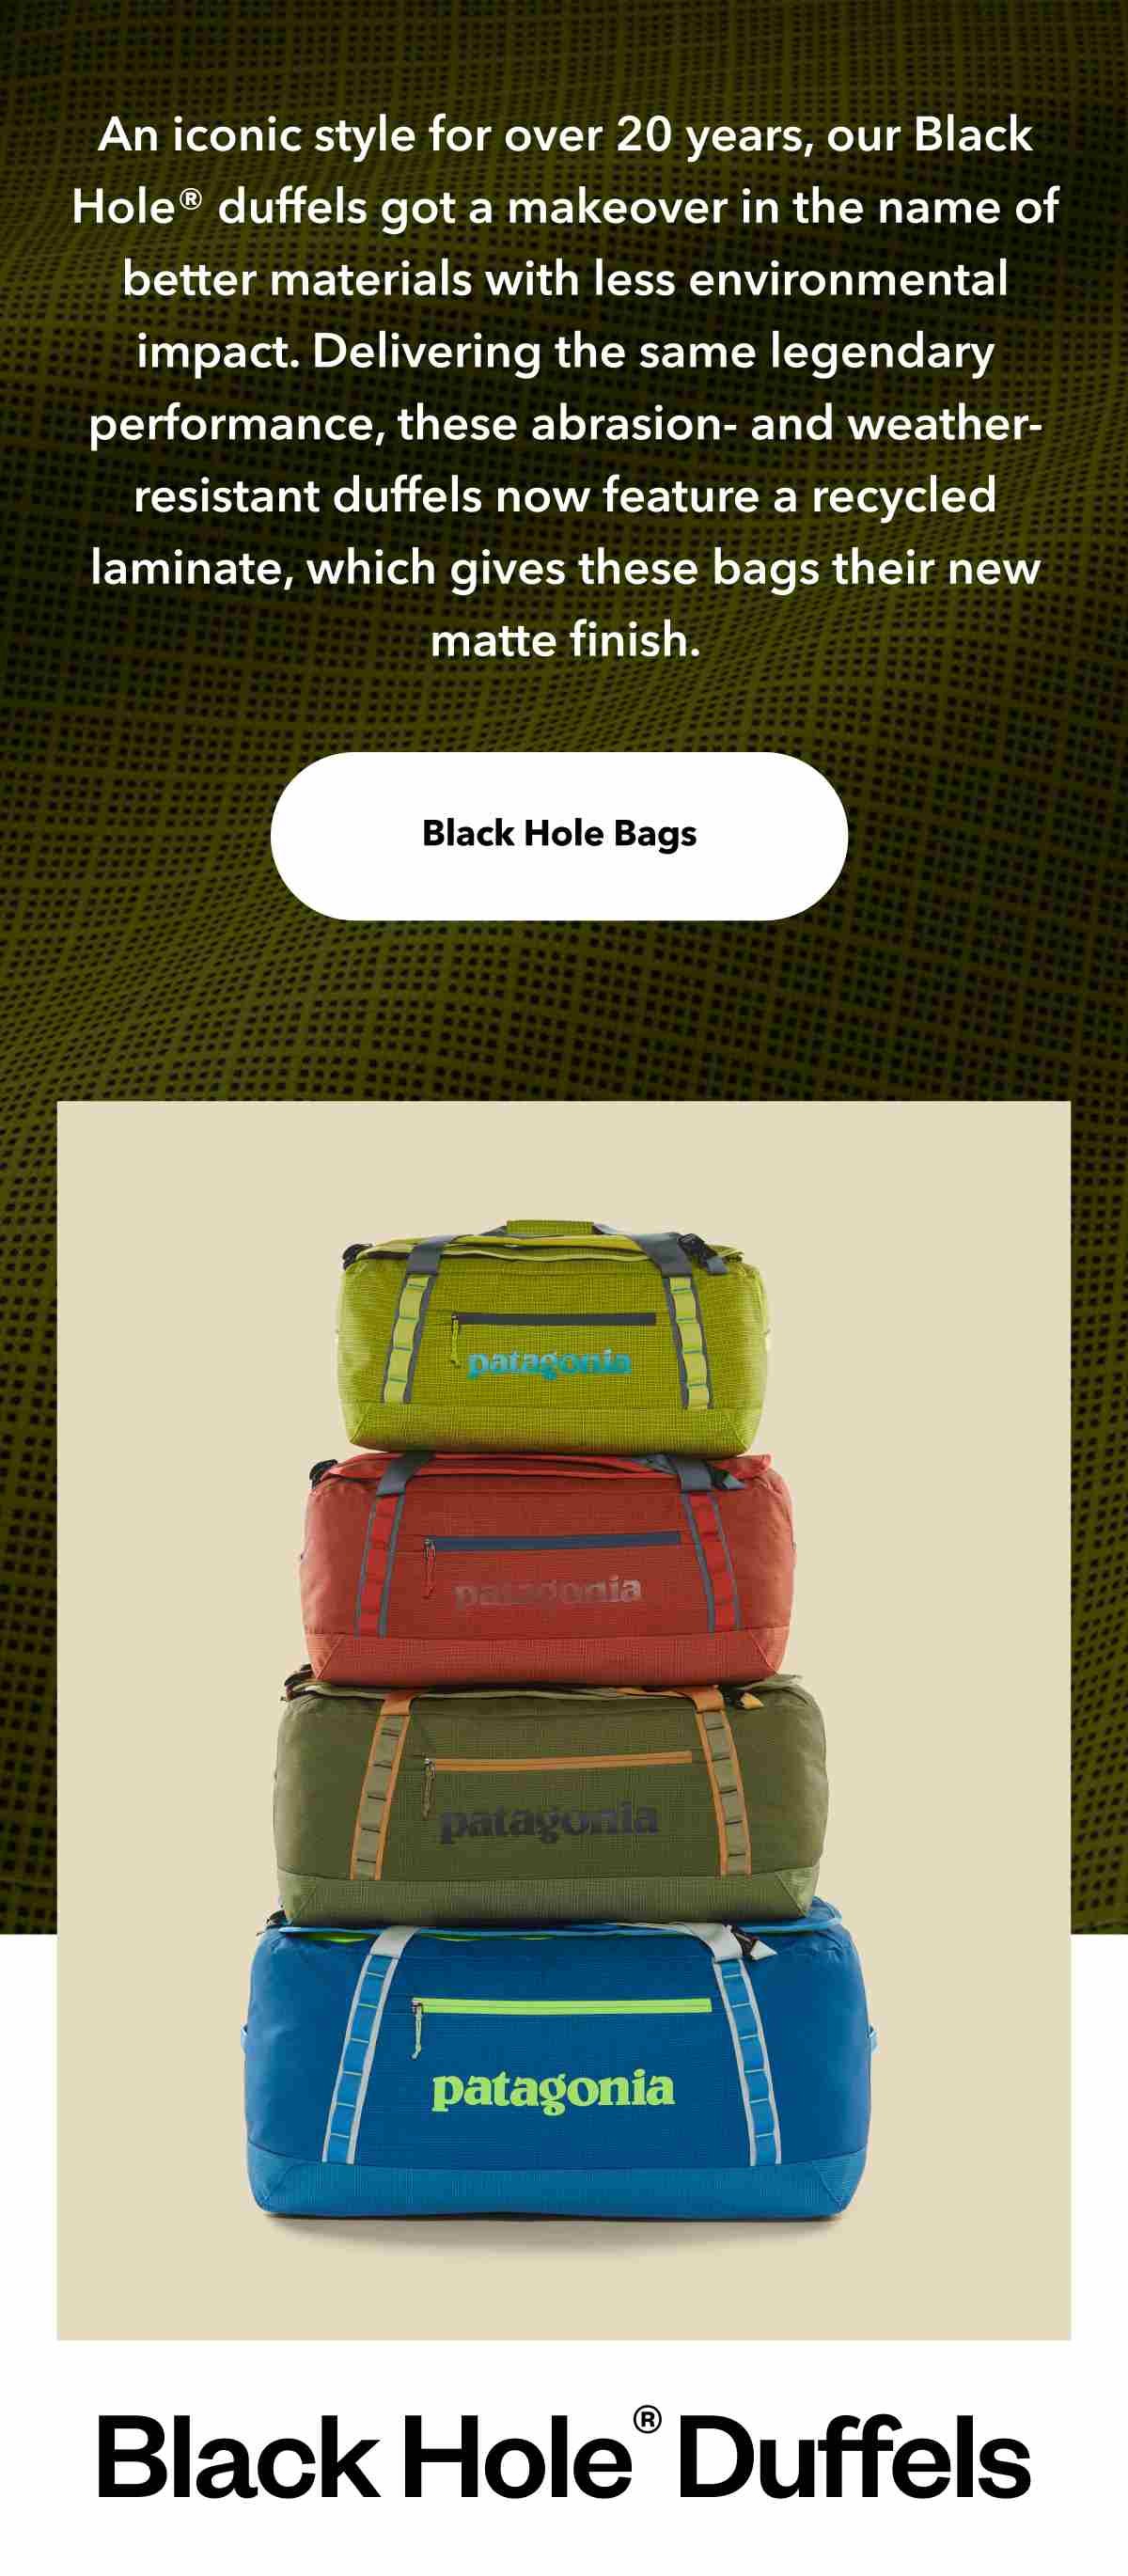 An iconic style for over 20 years, our Black Hole® duffels got a makeover in the name of better materials with less environmental impact. Delivering the same legendary performance, these abrasion- and weather-resistant duffels now feature a recycled laminate, which gives these bags their new matte finish. Shop Black Hole Bags. Four staked duffels of increasing size. Black Hole Duffels.